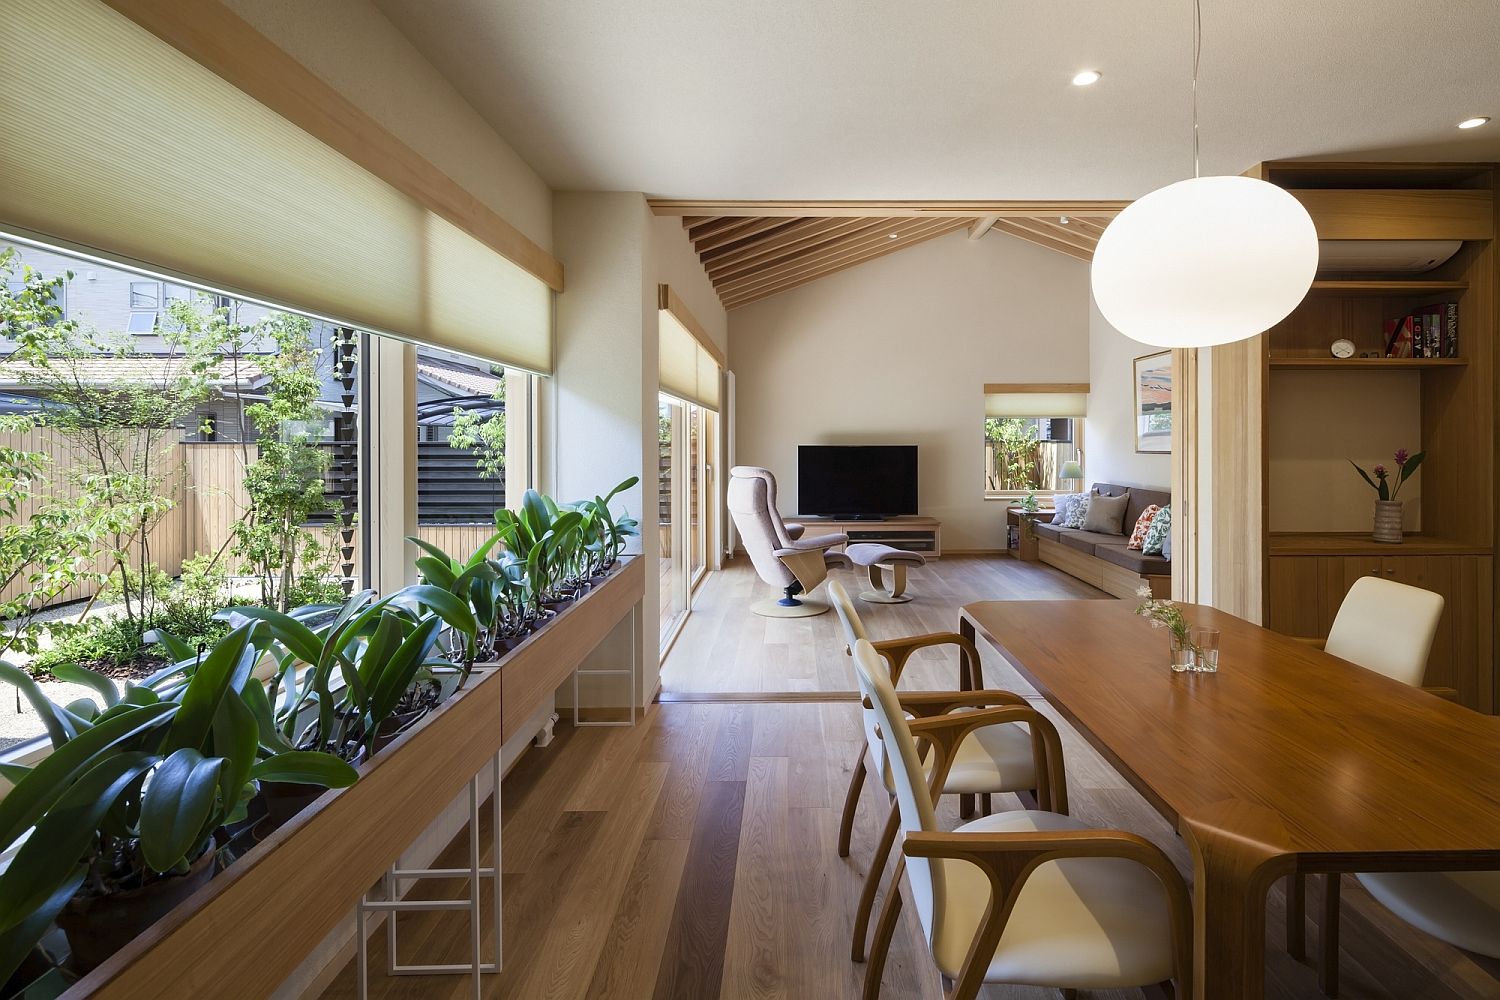 japanese modern elderly japan dining couple interior contemporary living contrasts materialicious greenery bring plants series apartment houses archdaily tweet okuno